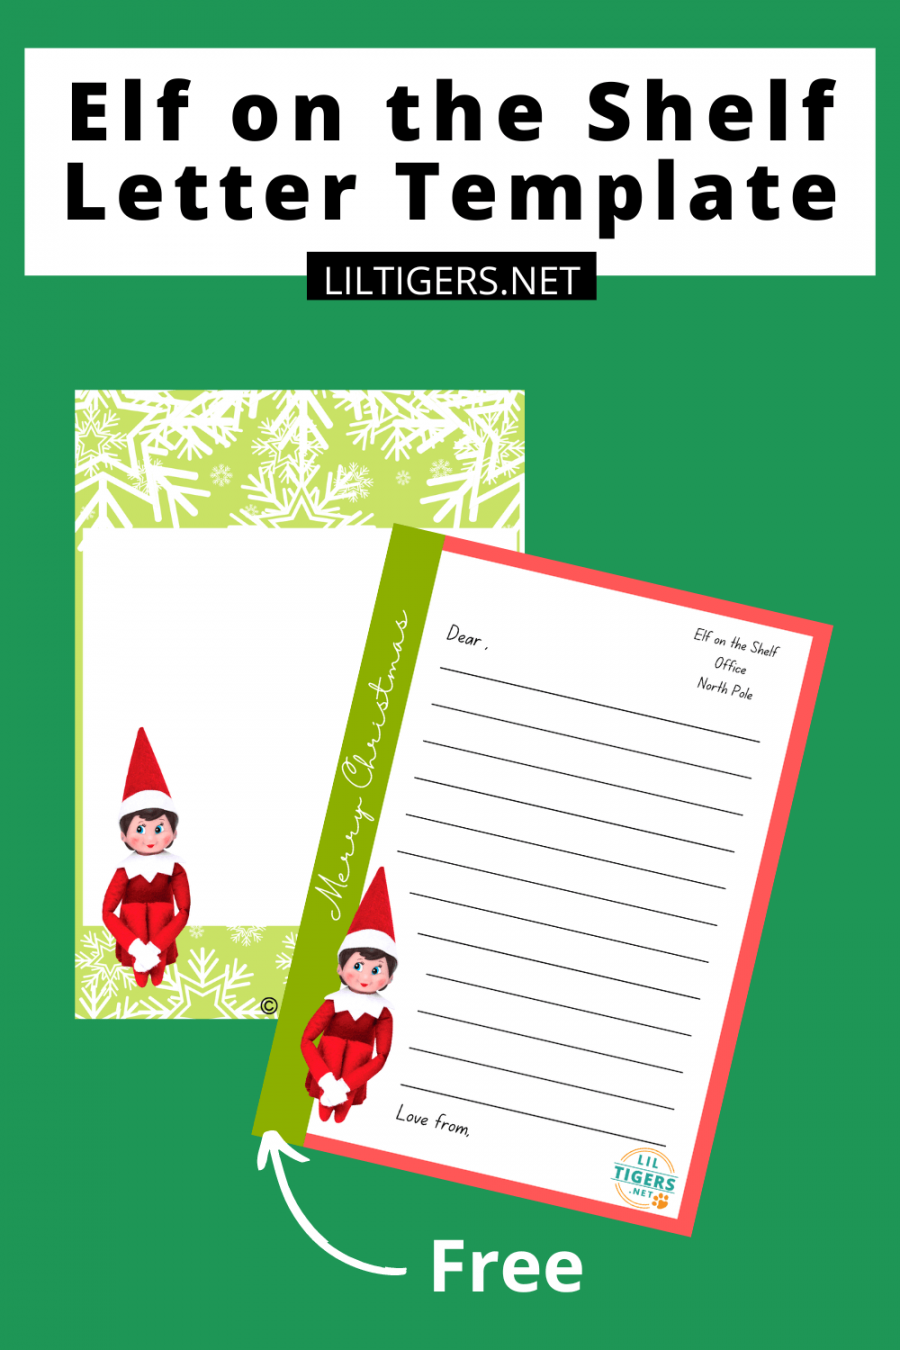 Template Free Elf On The Shelf Printables - Printable - Free Printable Elf on the Shelf Letter Templates - Lil Tigers